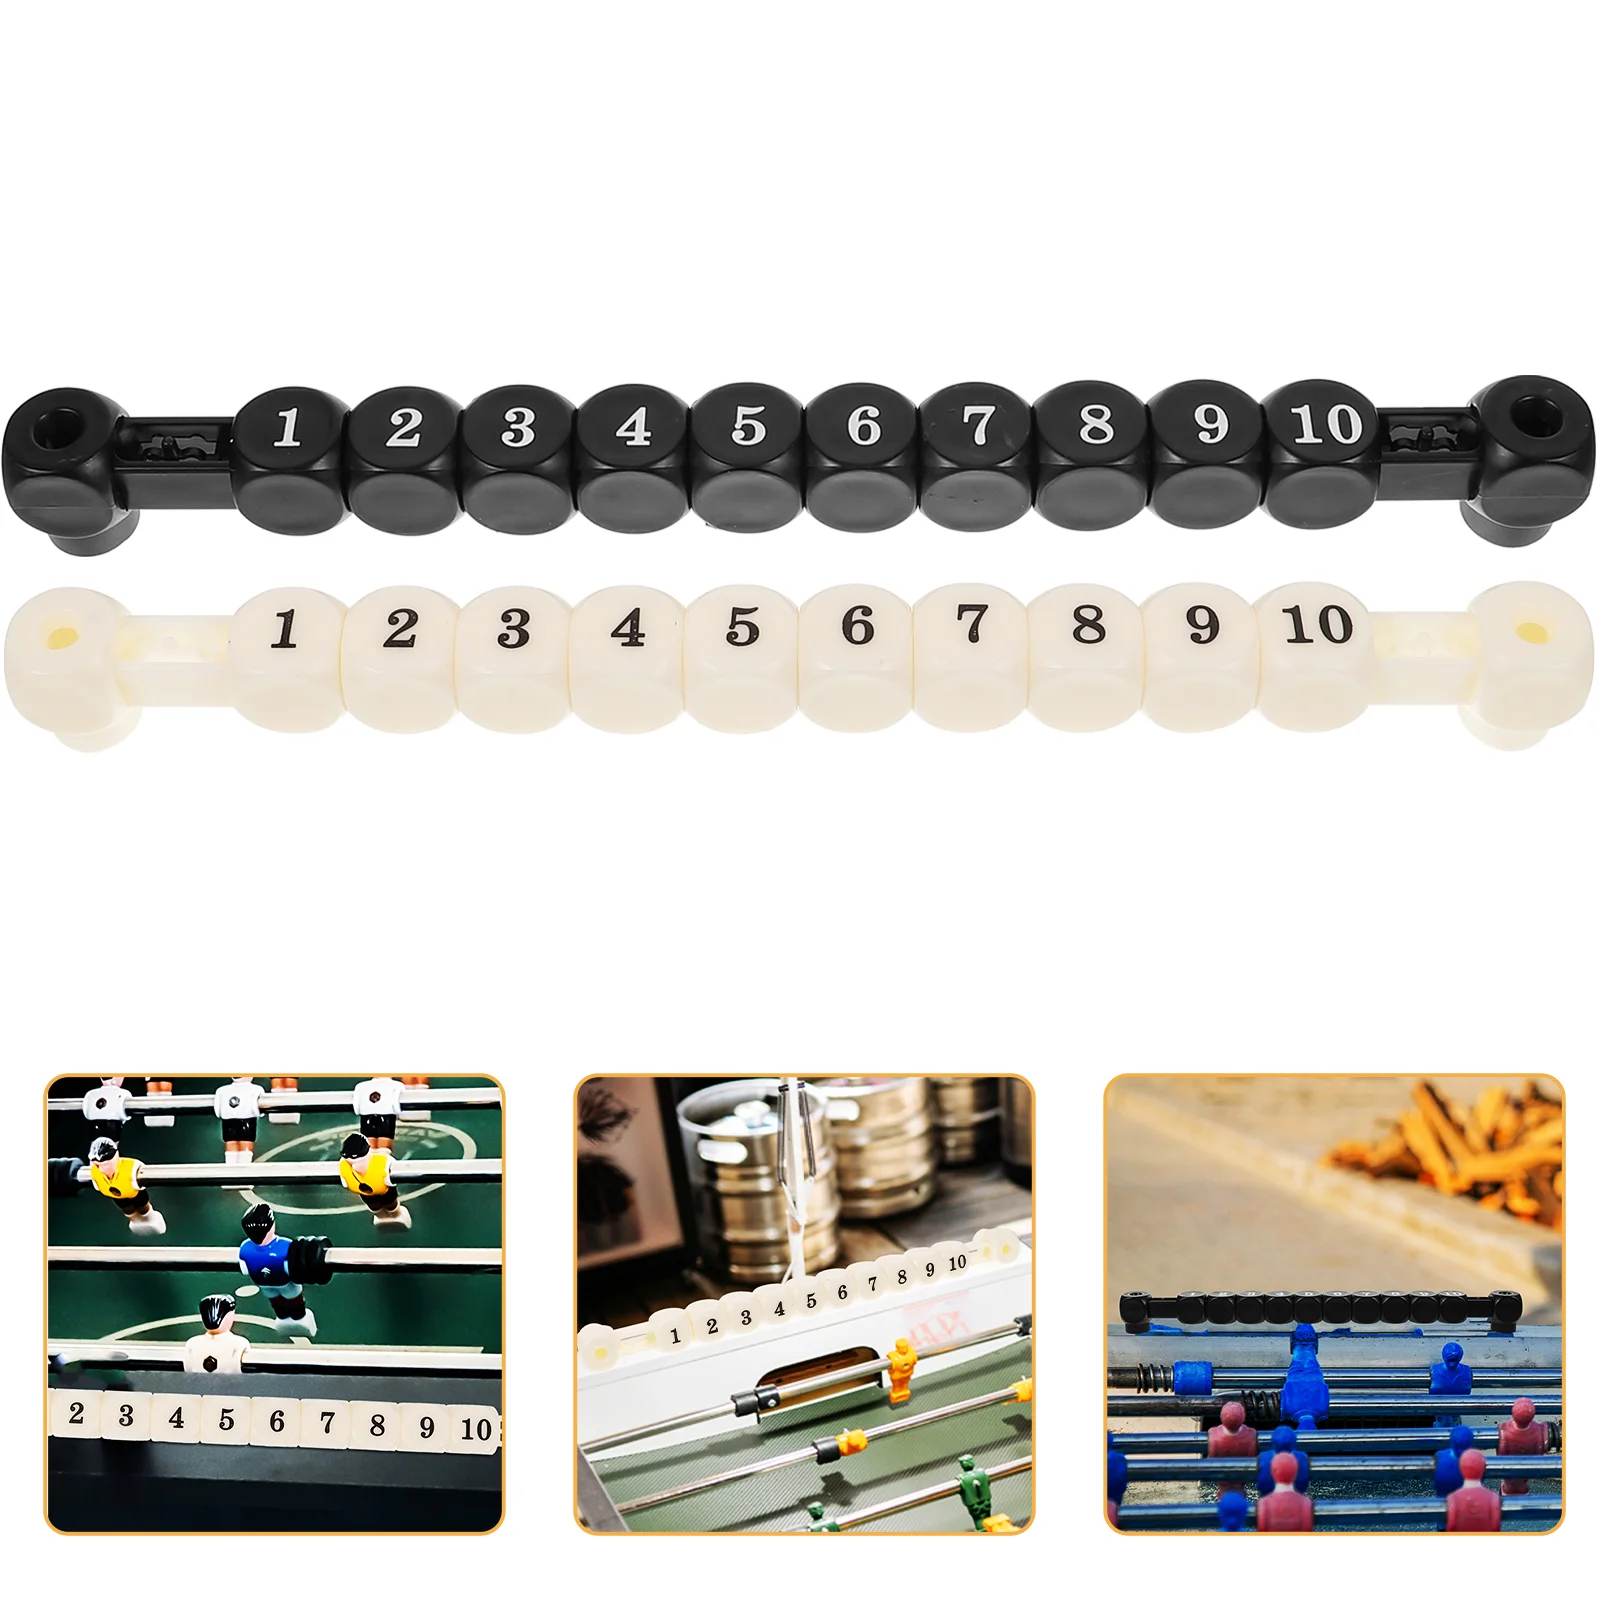 2Pcs Scorekeeper for Foosball Table Foosball Score Counters Table Score Keepers Scoring Markers 2pcs electronic counters display school game fingers counter ring type number tools household sewing knitting weave